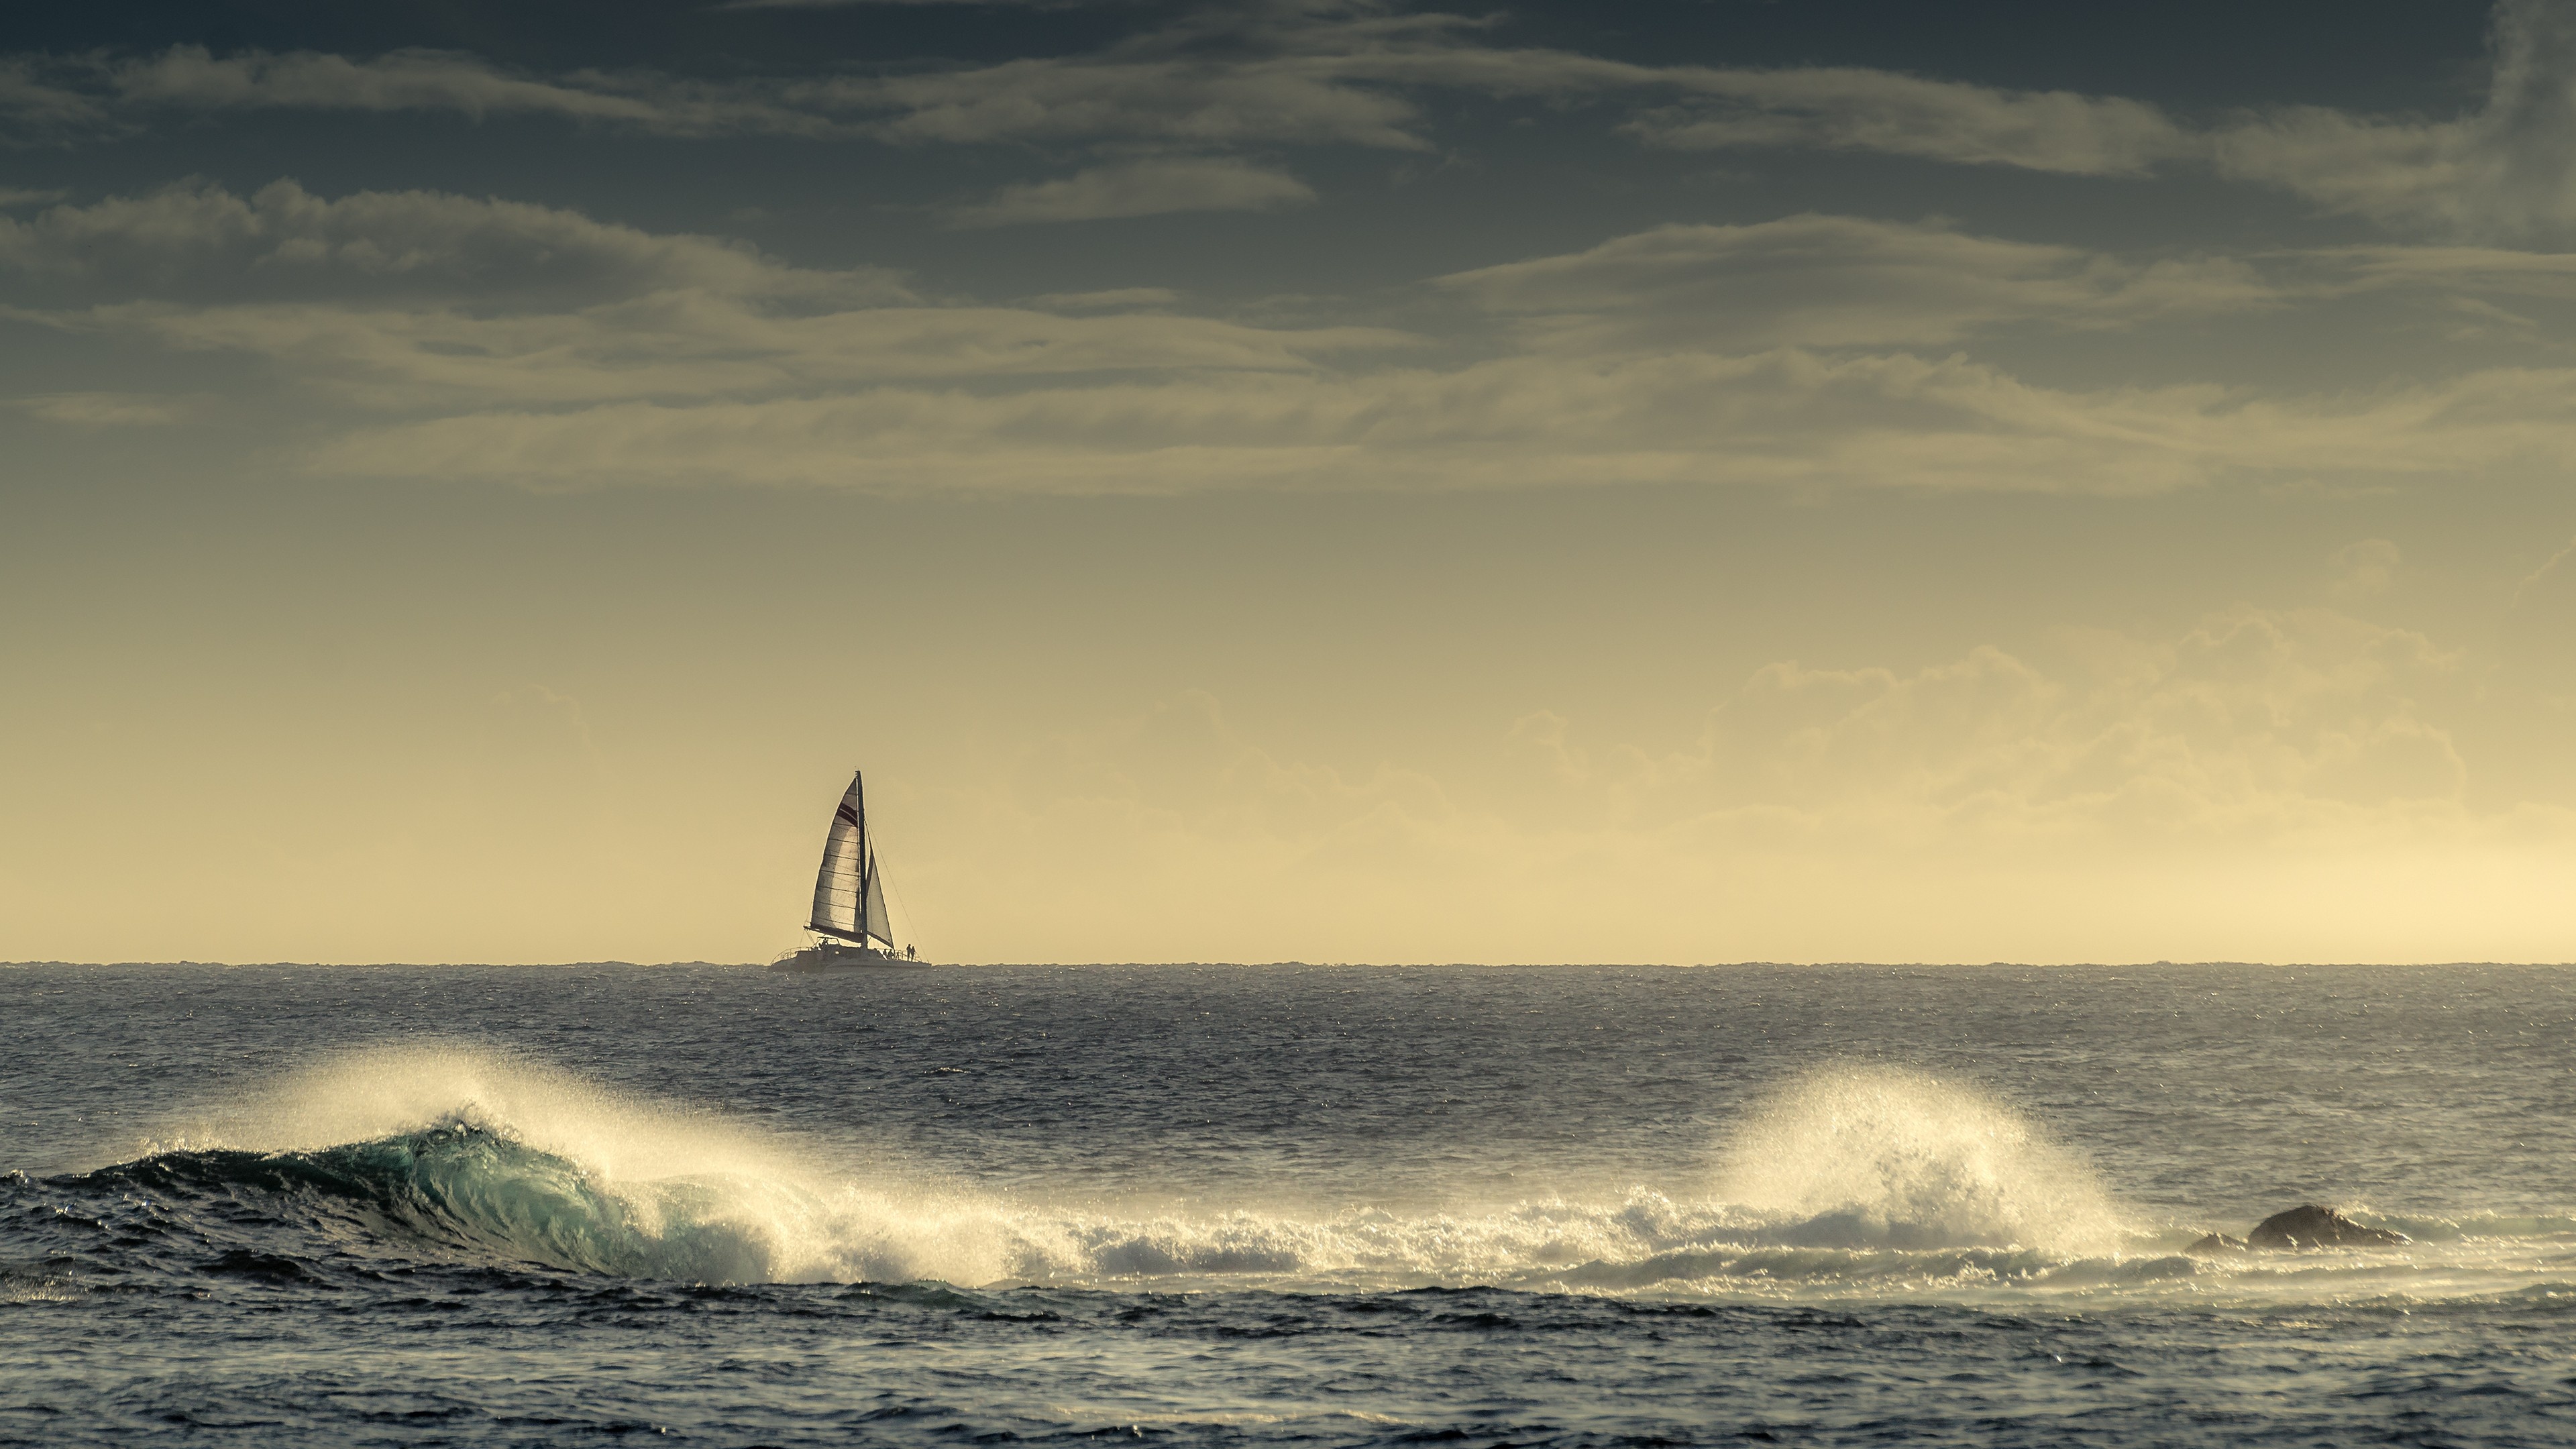 Sailing: Boat, Sea vehicle, Ocean, Wind, Wave, Water sport, A voyage at the sea. 3840x2160 4K Wallpaper.